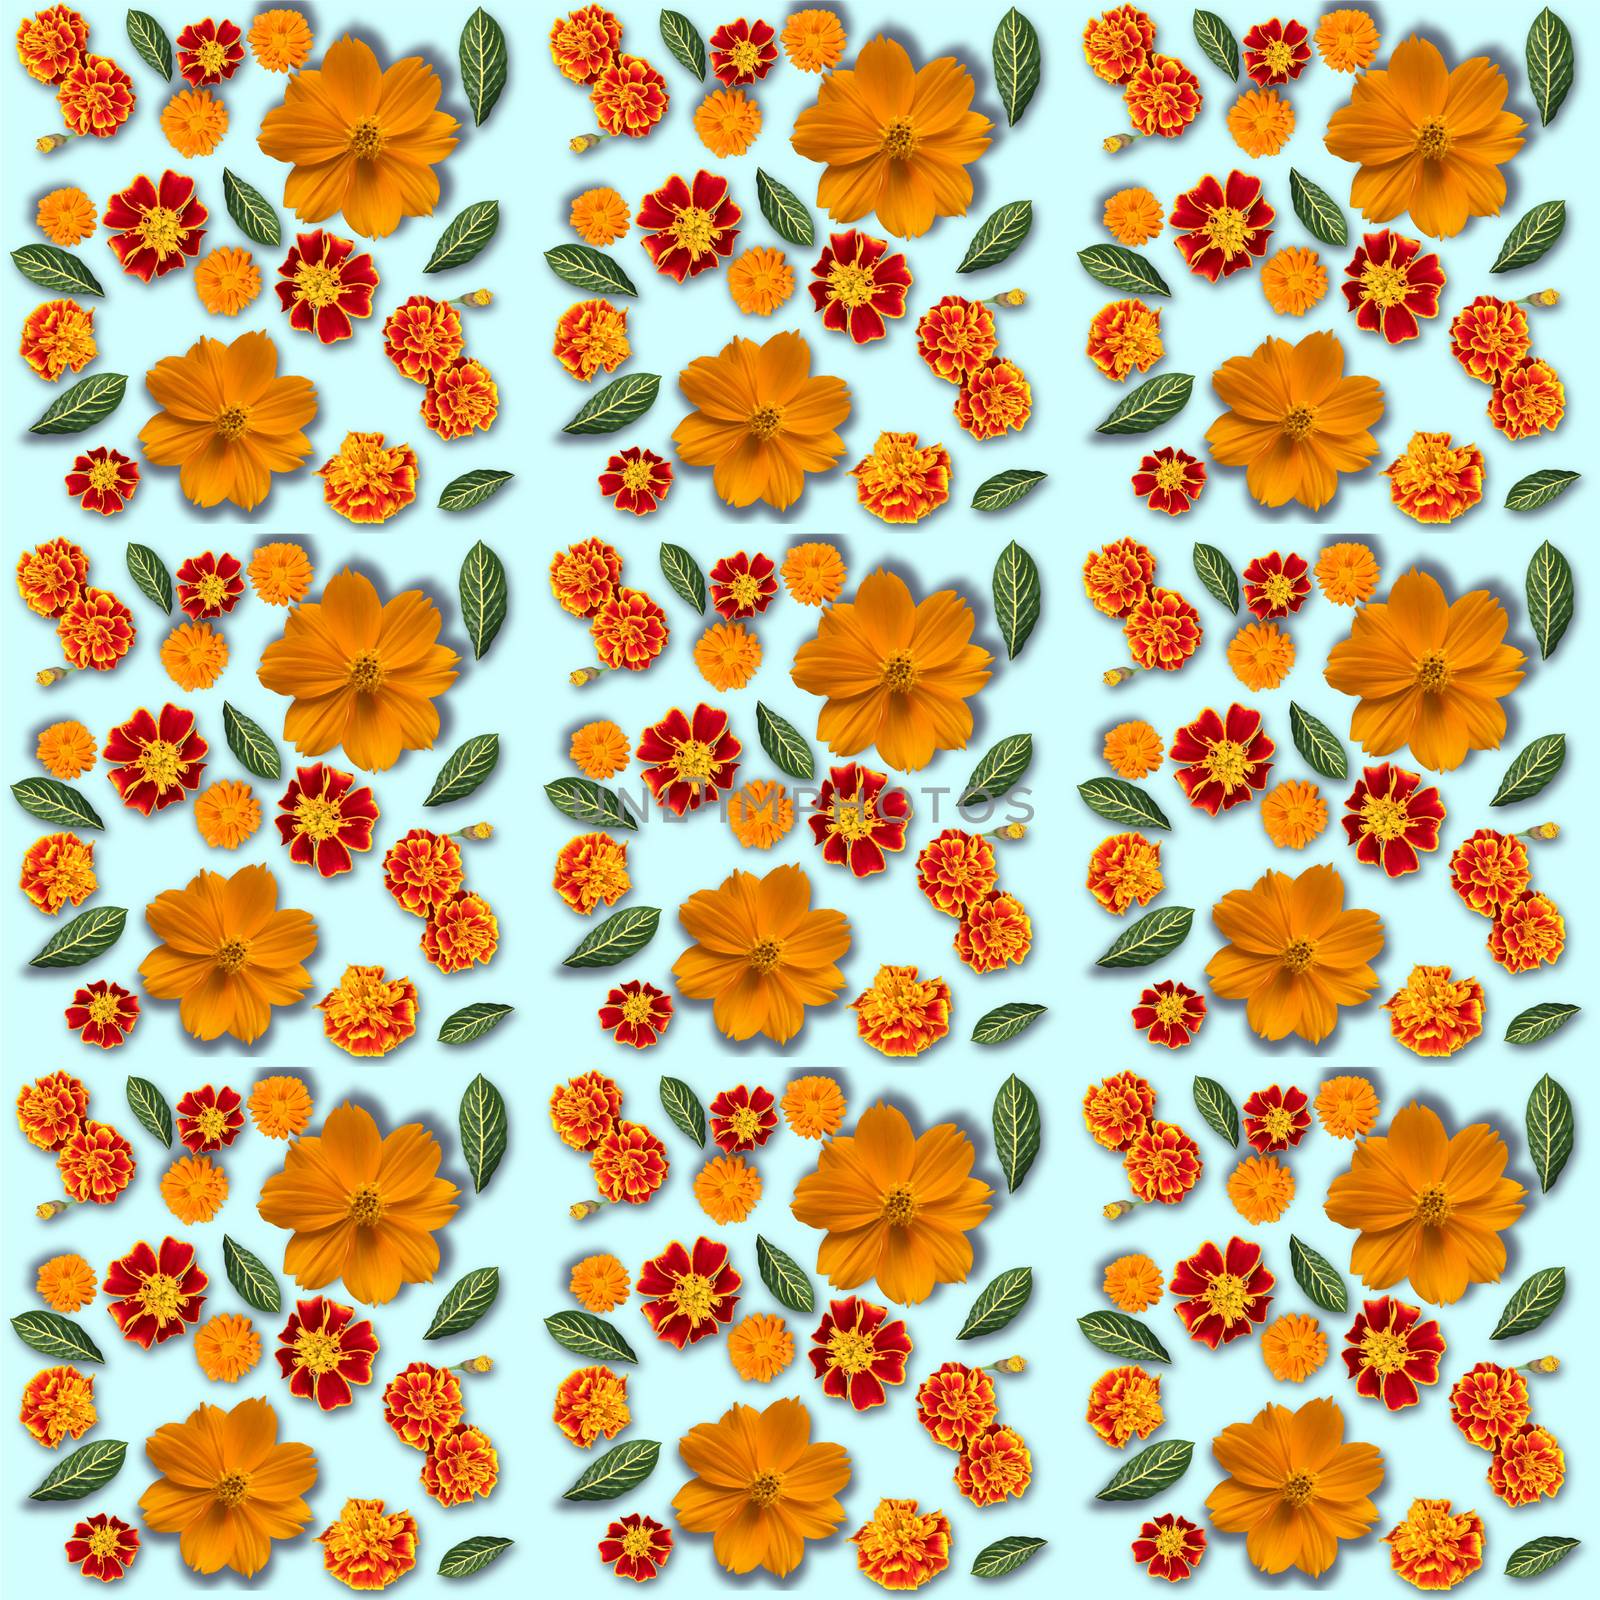 Yellow flowers pattern on a blue background. by Margolana